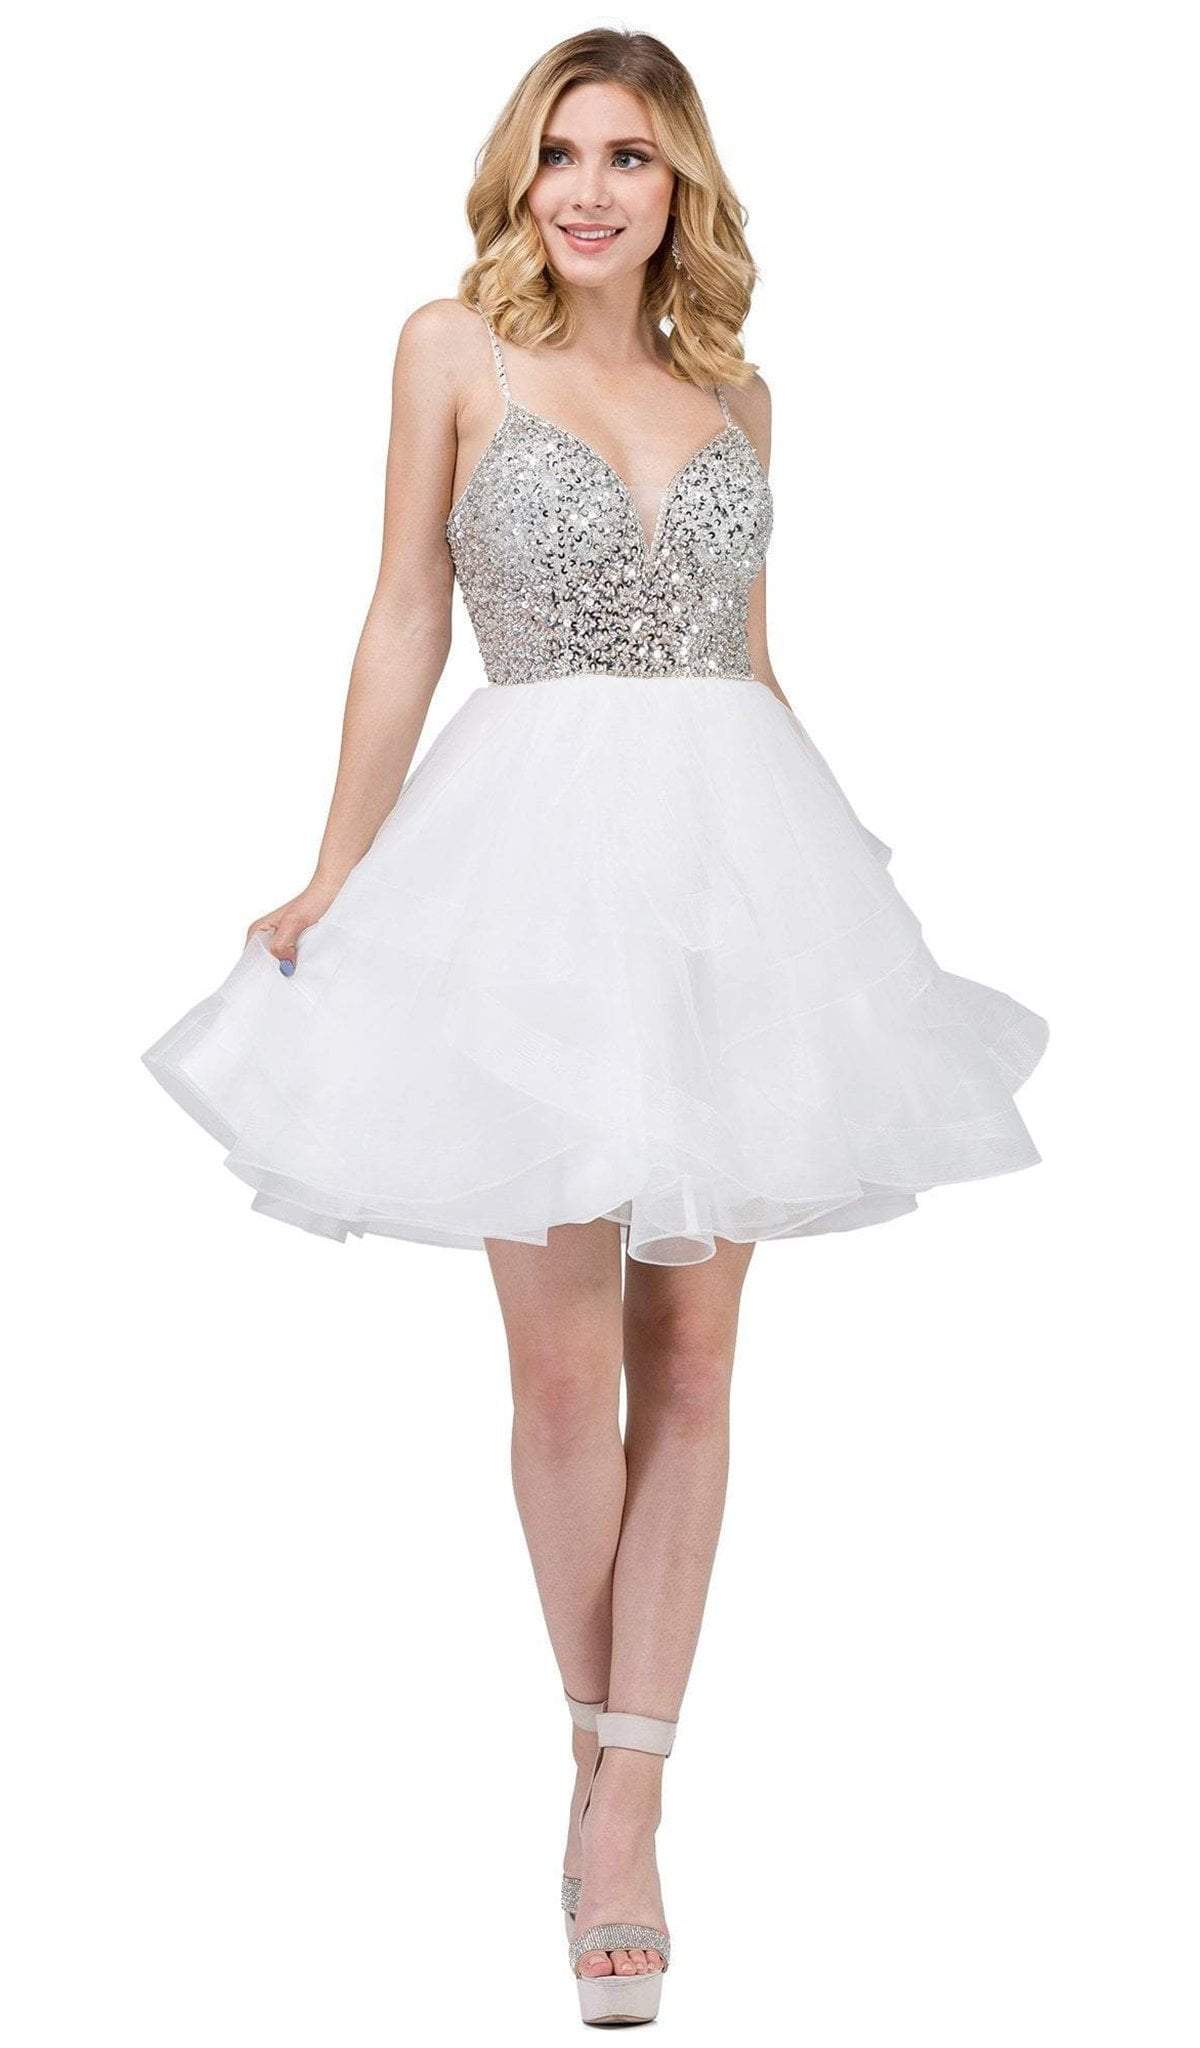 Dancing Queen - 3050 Bejeweled V-neck Tiered A-line Homecoming Dress in White